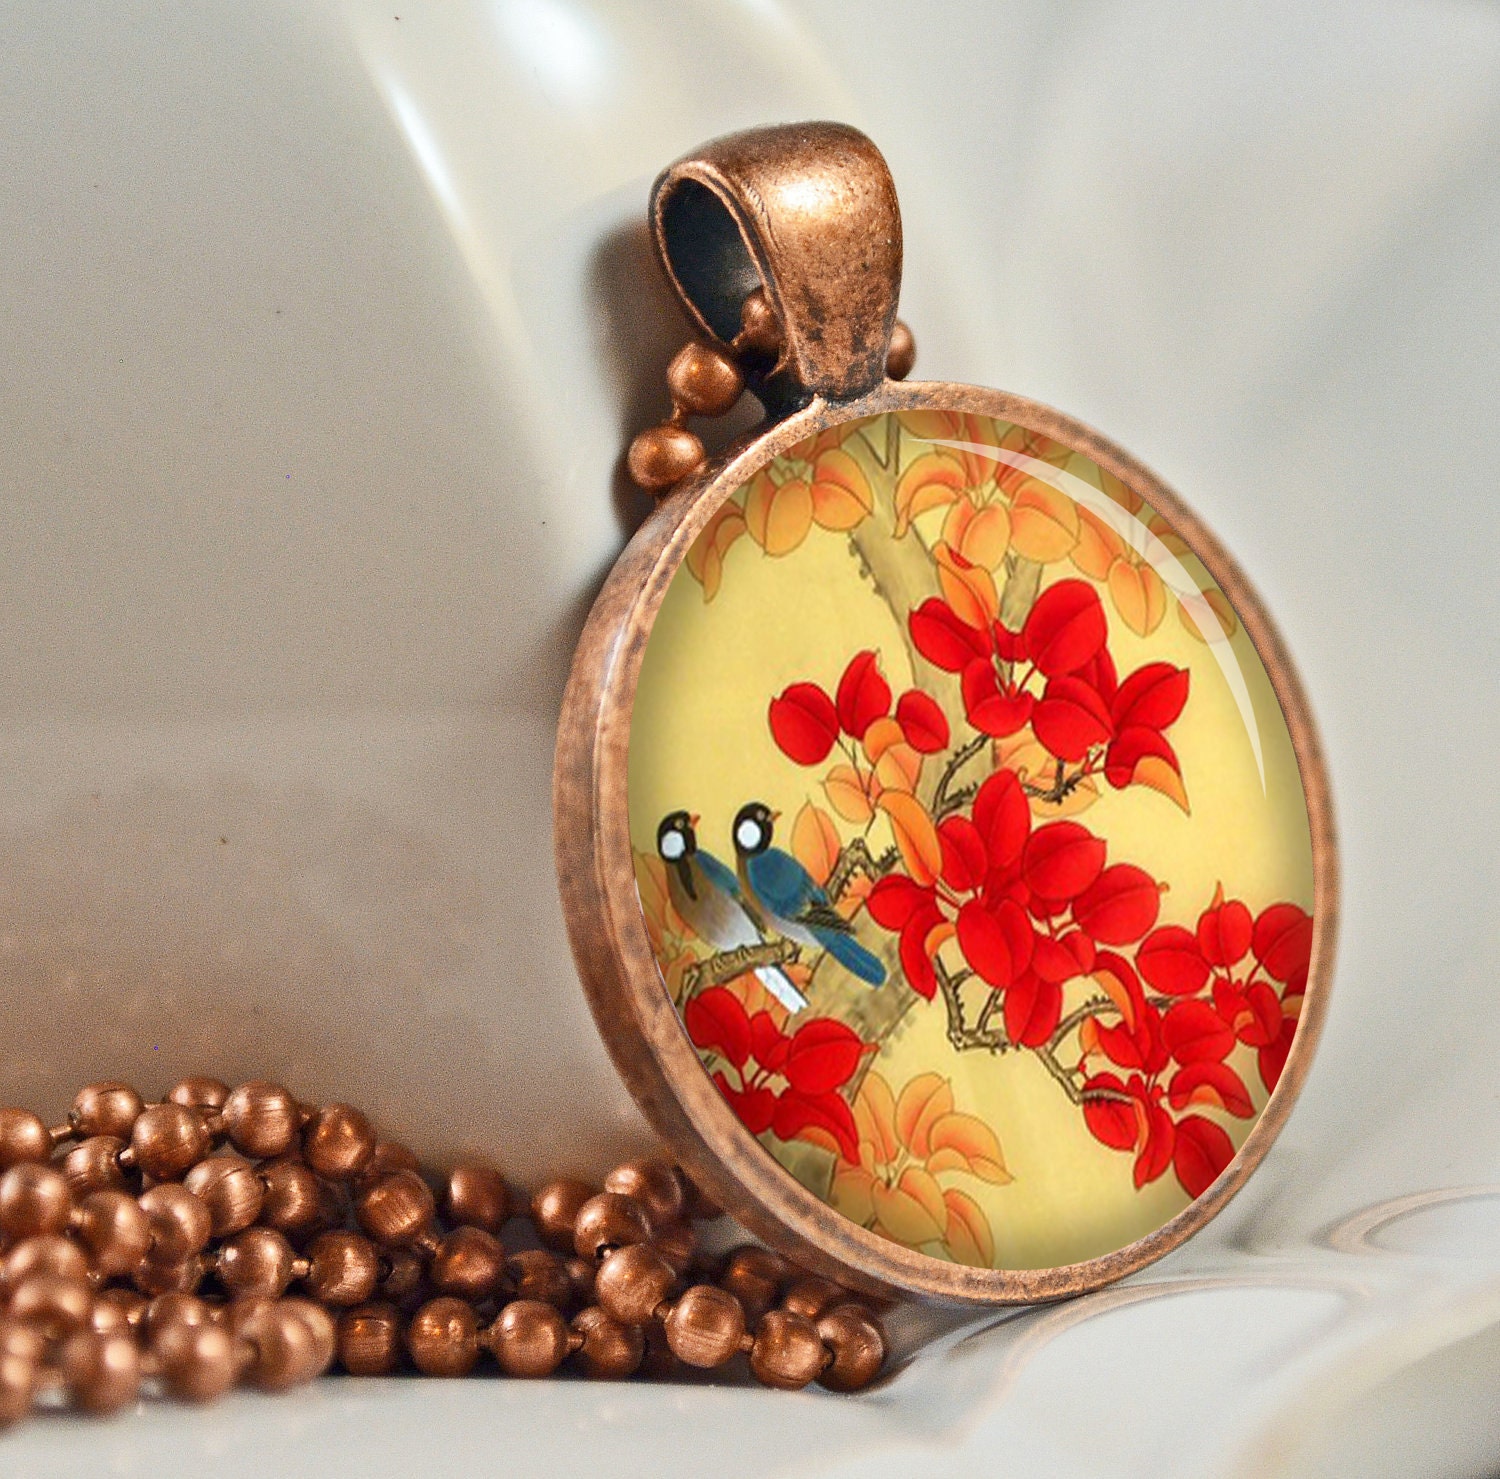 Japanese Red Blossom Birds Vintage Art Resin Pendant Resin Picture Pendant Japanese Art Bird Pendant C228C - artyscapes